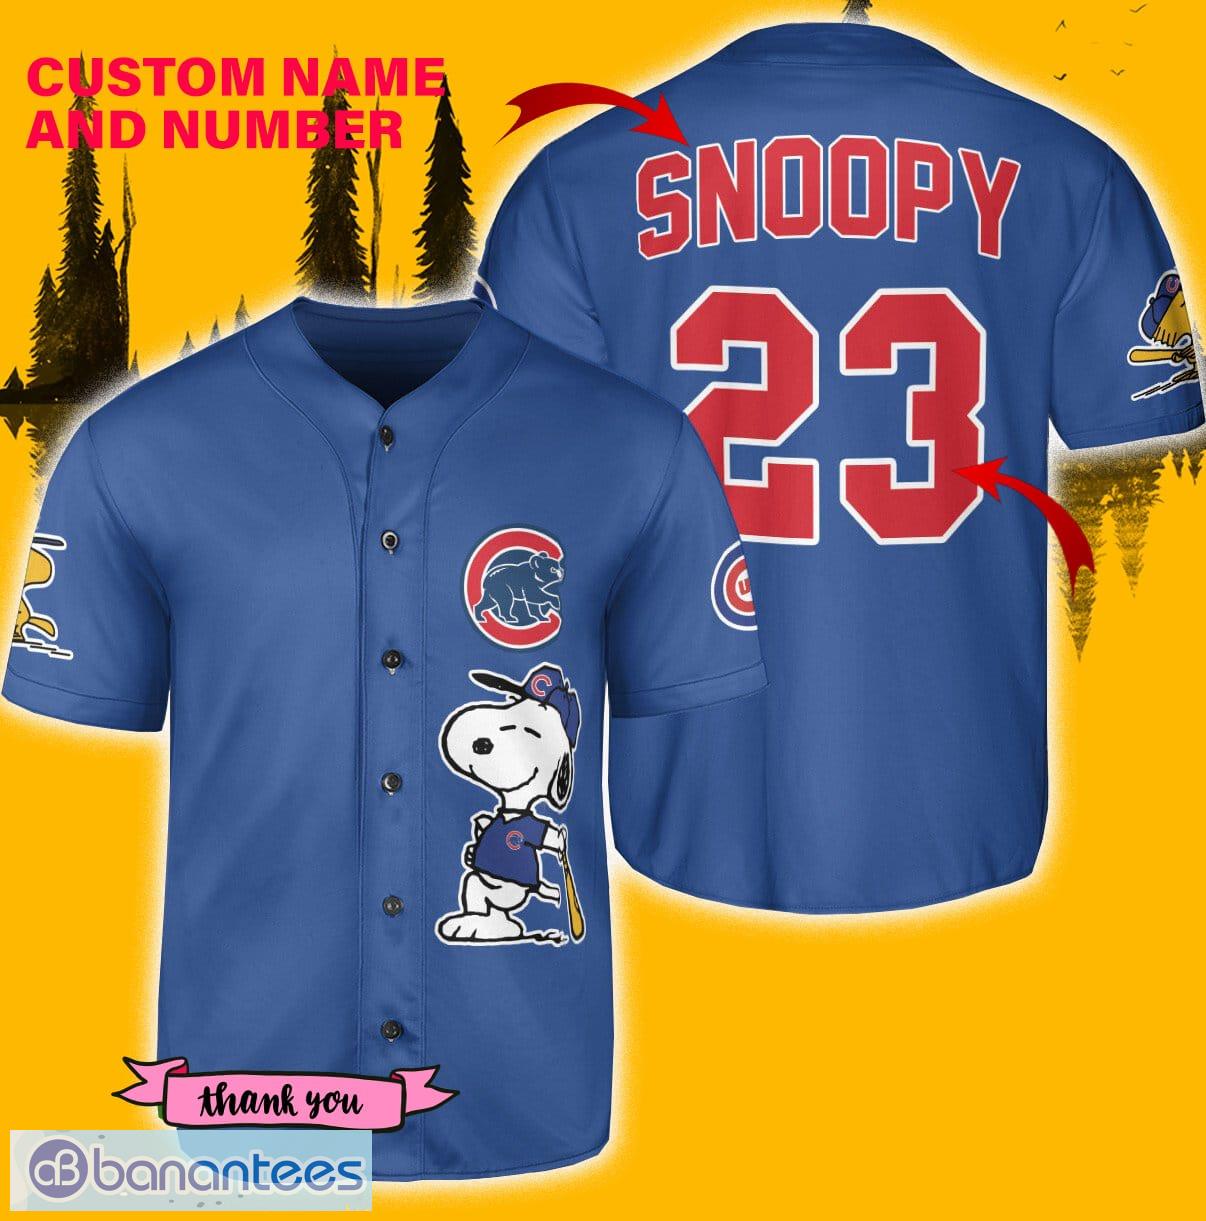 Chicago Cubs Shirt Men Large Blue Single Stitch Snoopy Peanuts